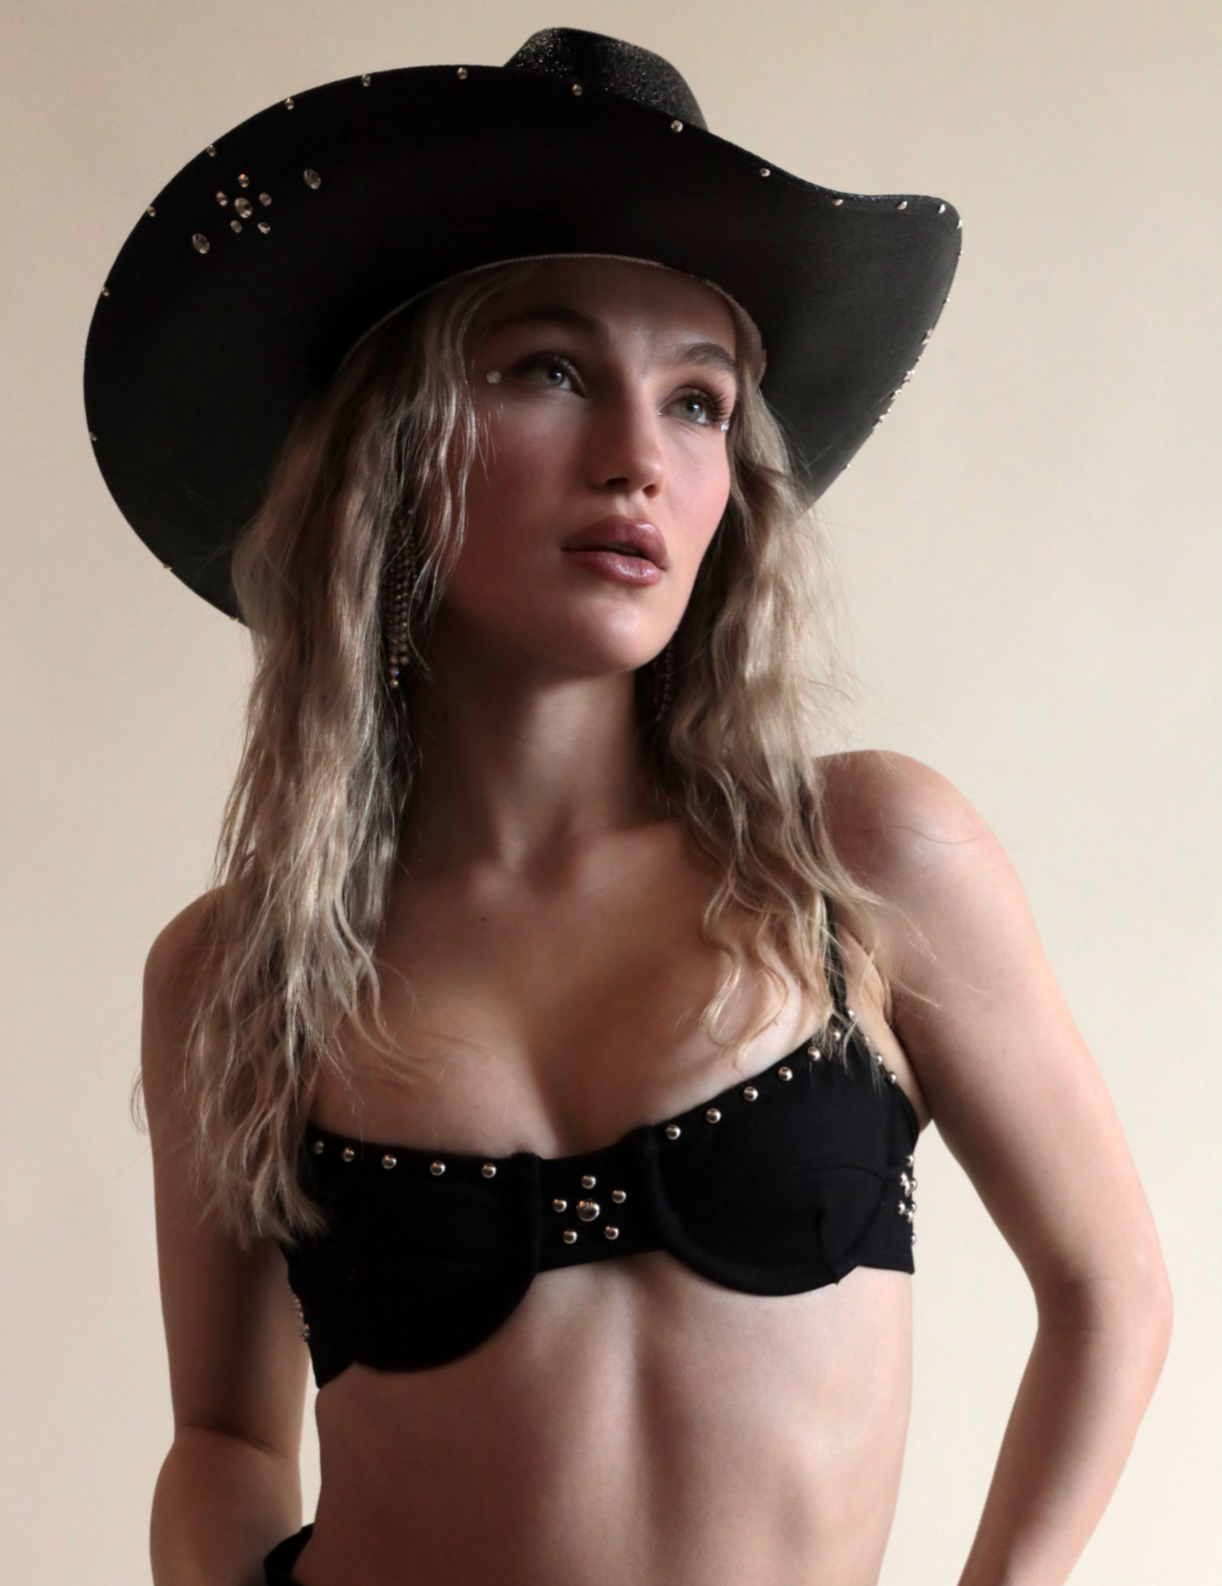 Black cowboy hat with metallic jewels paired with denim grommeted bra.